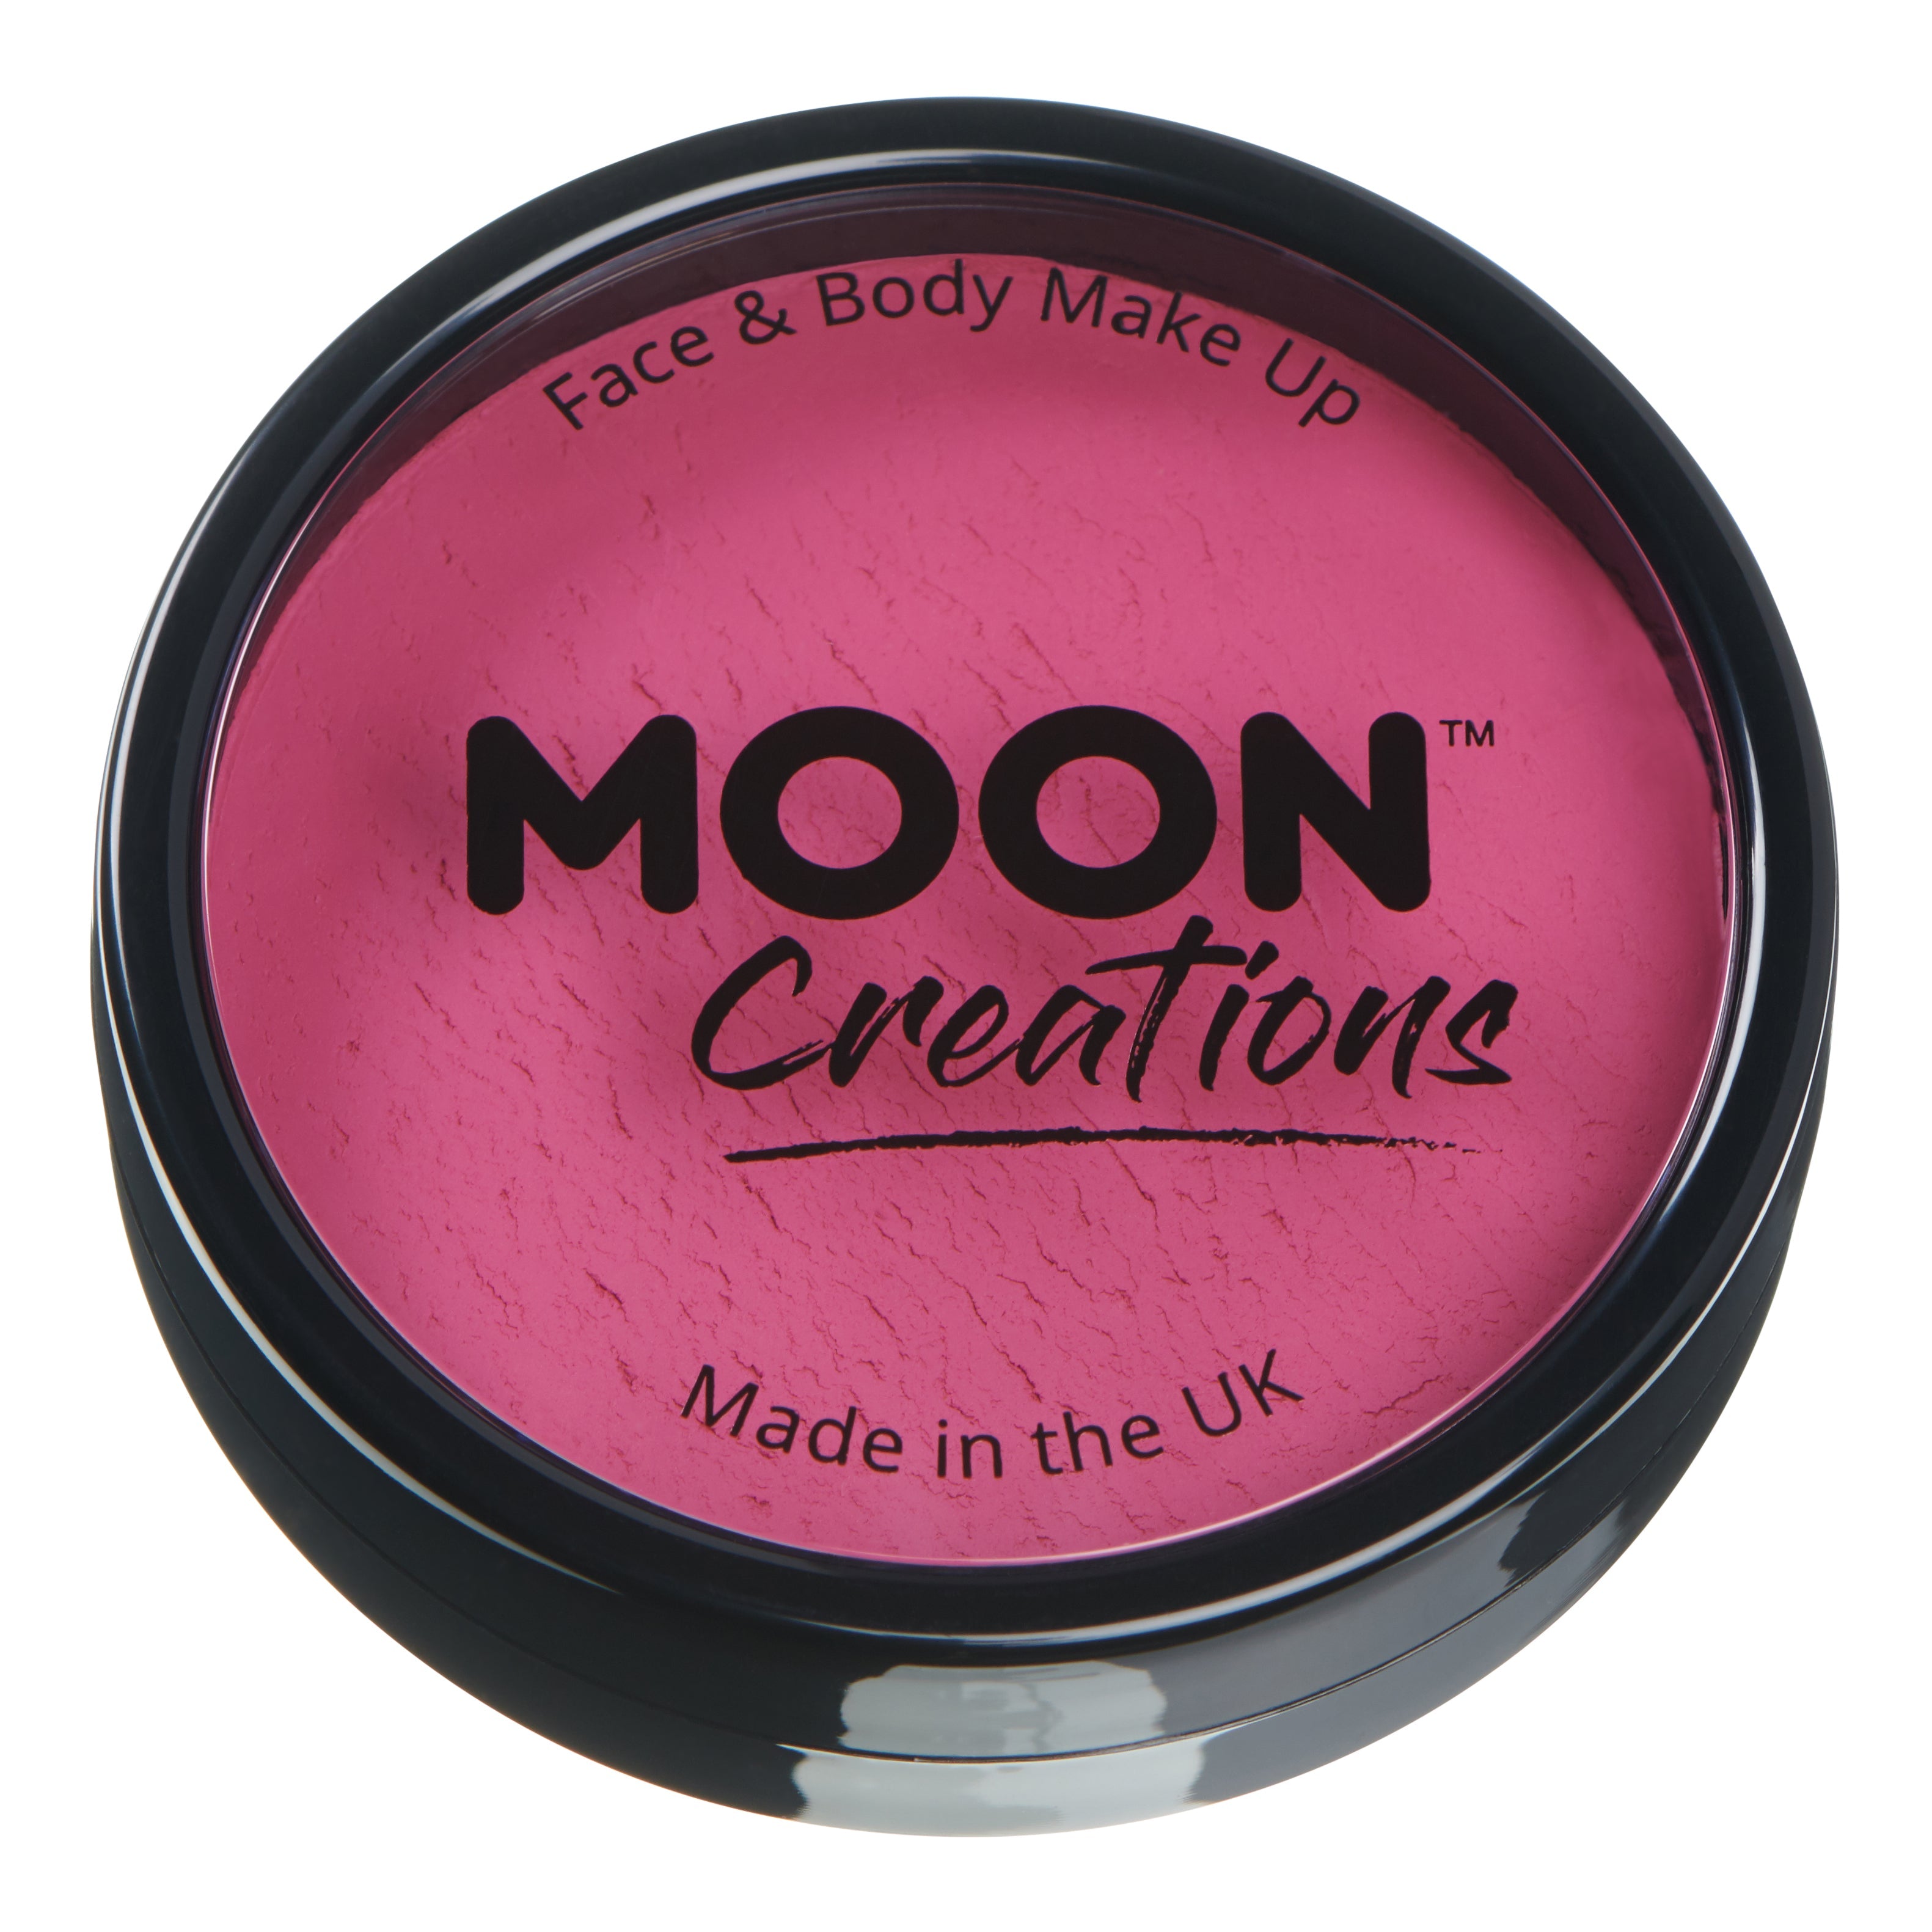 Dark Pink - Pro Professional Face Paint, 36g. Cosmetically certified, FDA & Health Canada compliant, cruelty free and vegan.